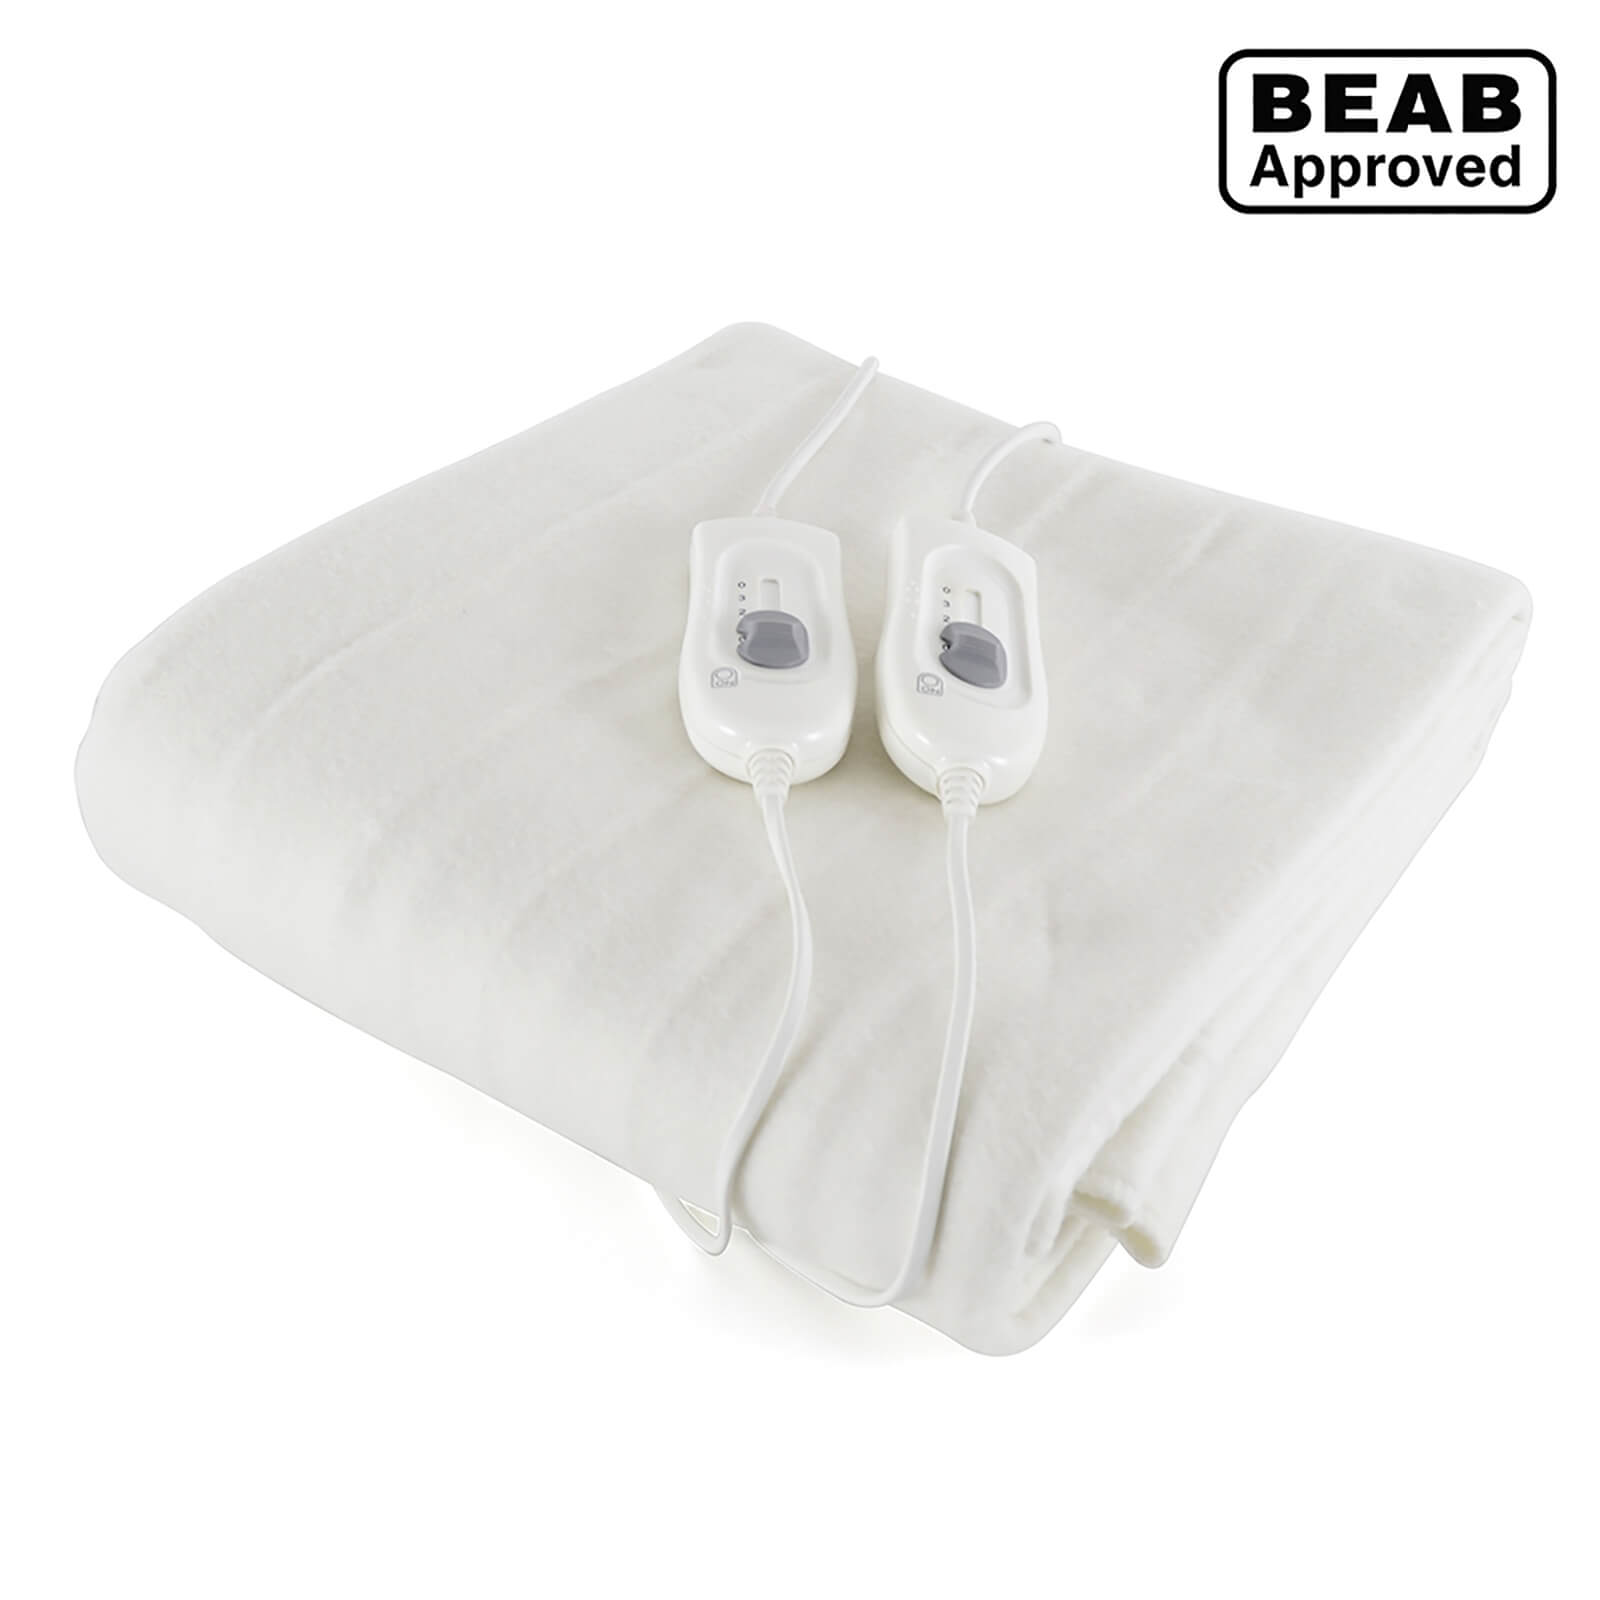 StayWarm Superior Electric Blanket - King (BEAB Approved)